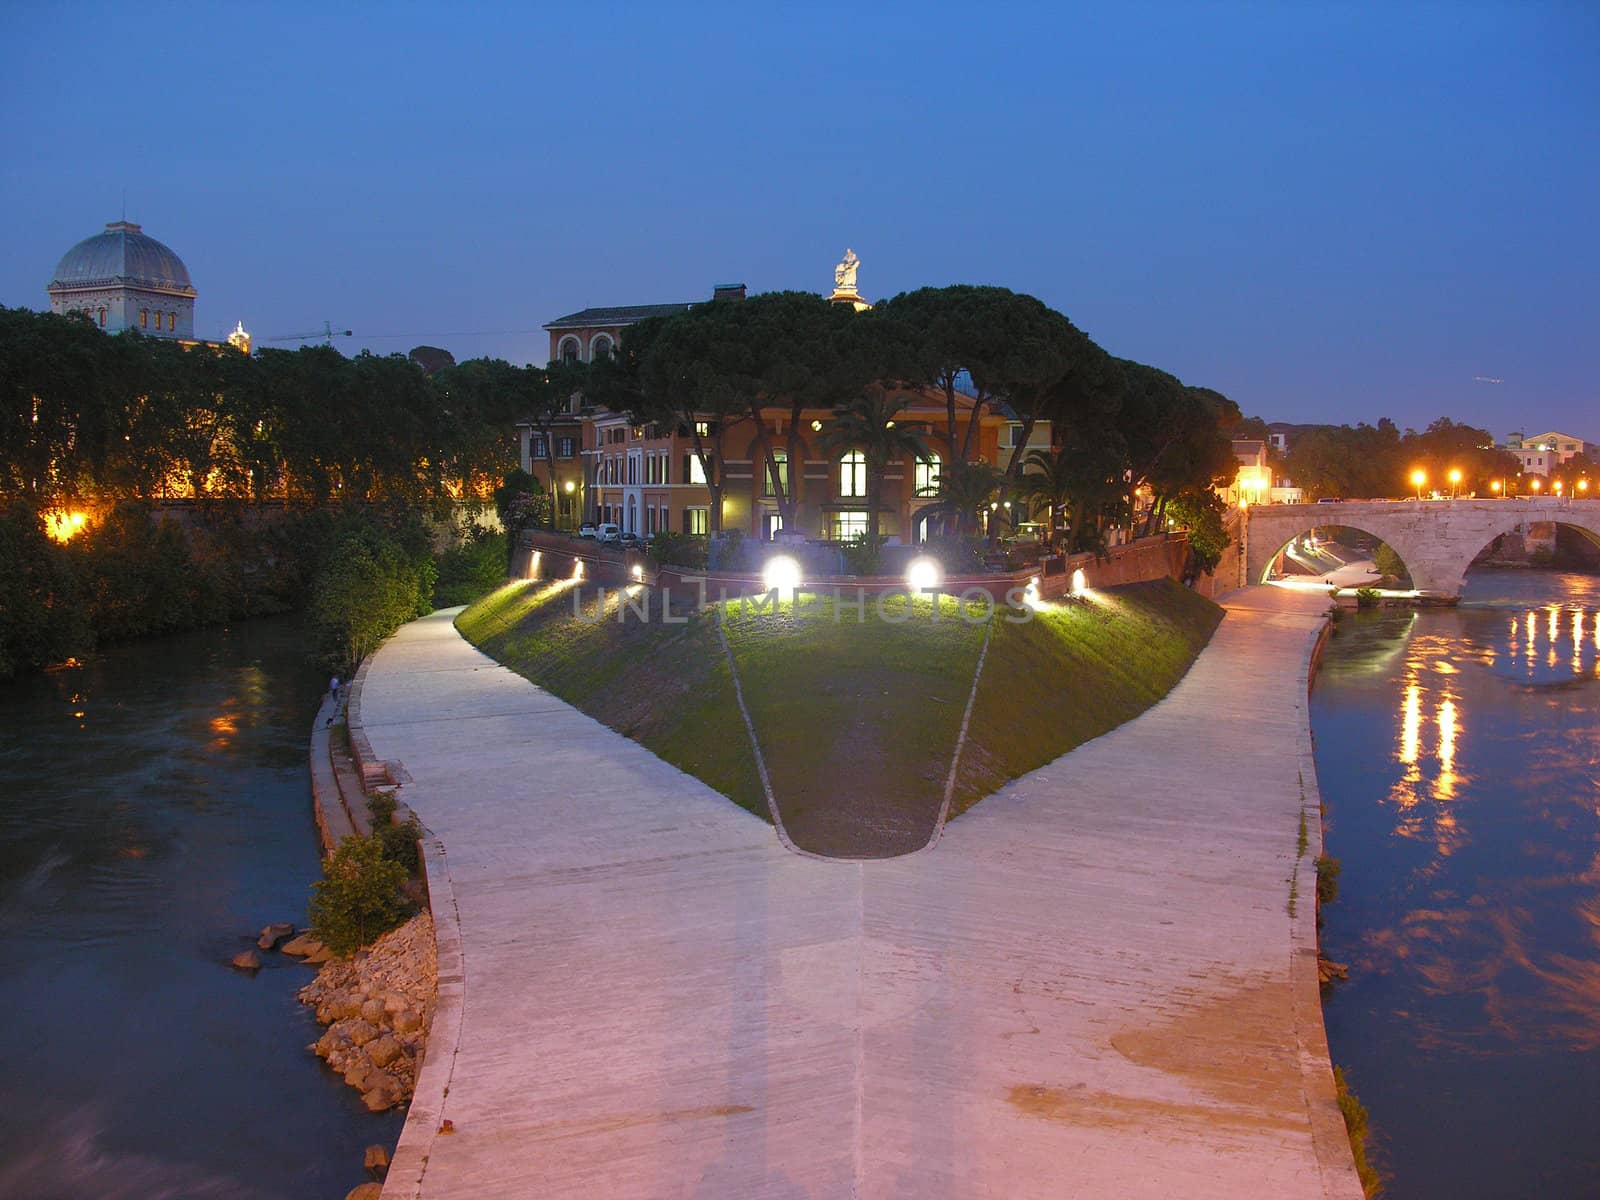 Lungotevere at Night, Rome, 2005 by jovannig